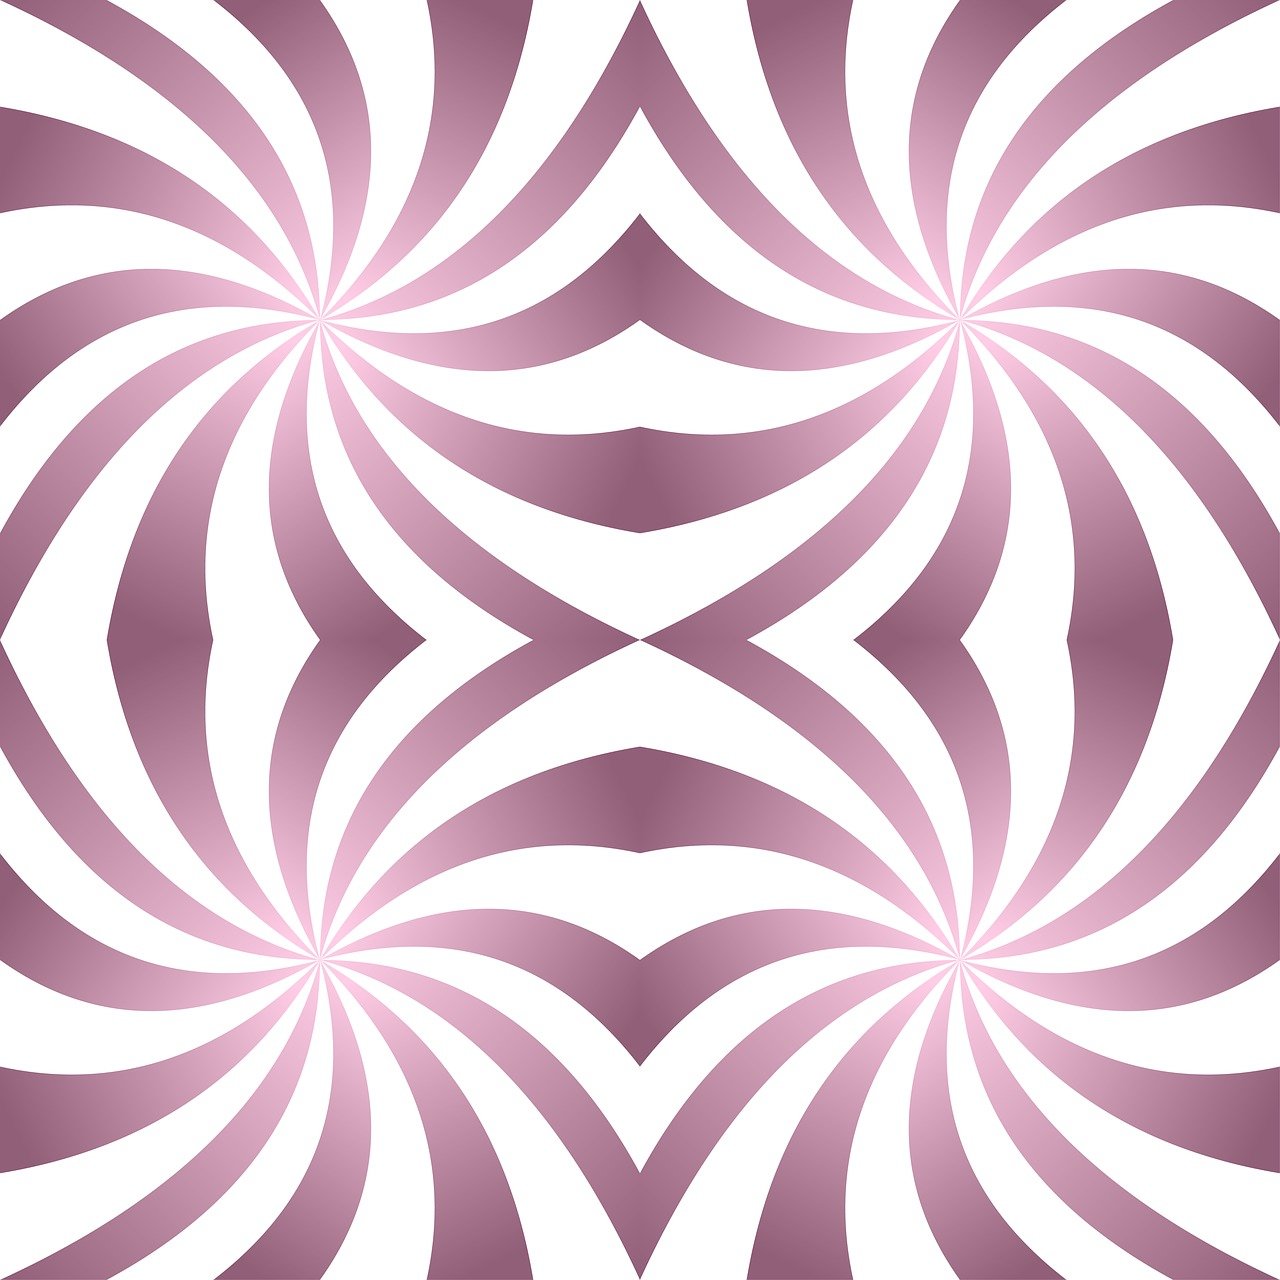 a pattern of pink and white swirls on a white background, inspired by Bridget Riley, pixabay, abstract illusionism, symmetrical tarot illustration, twisted rays, mauve background, symmetry illustration